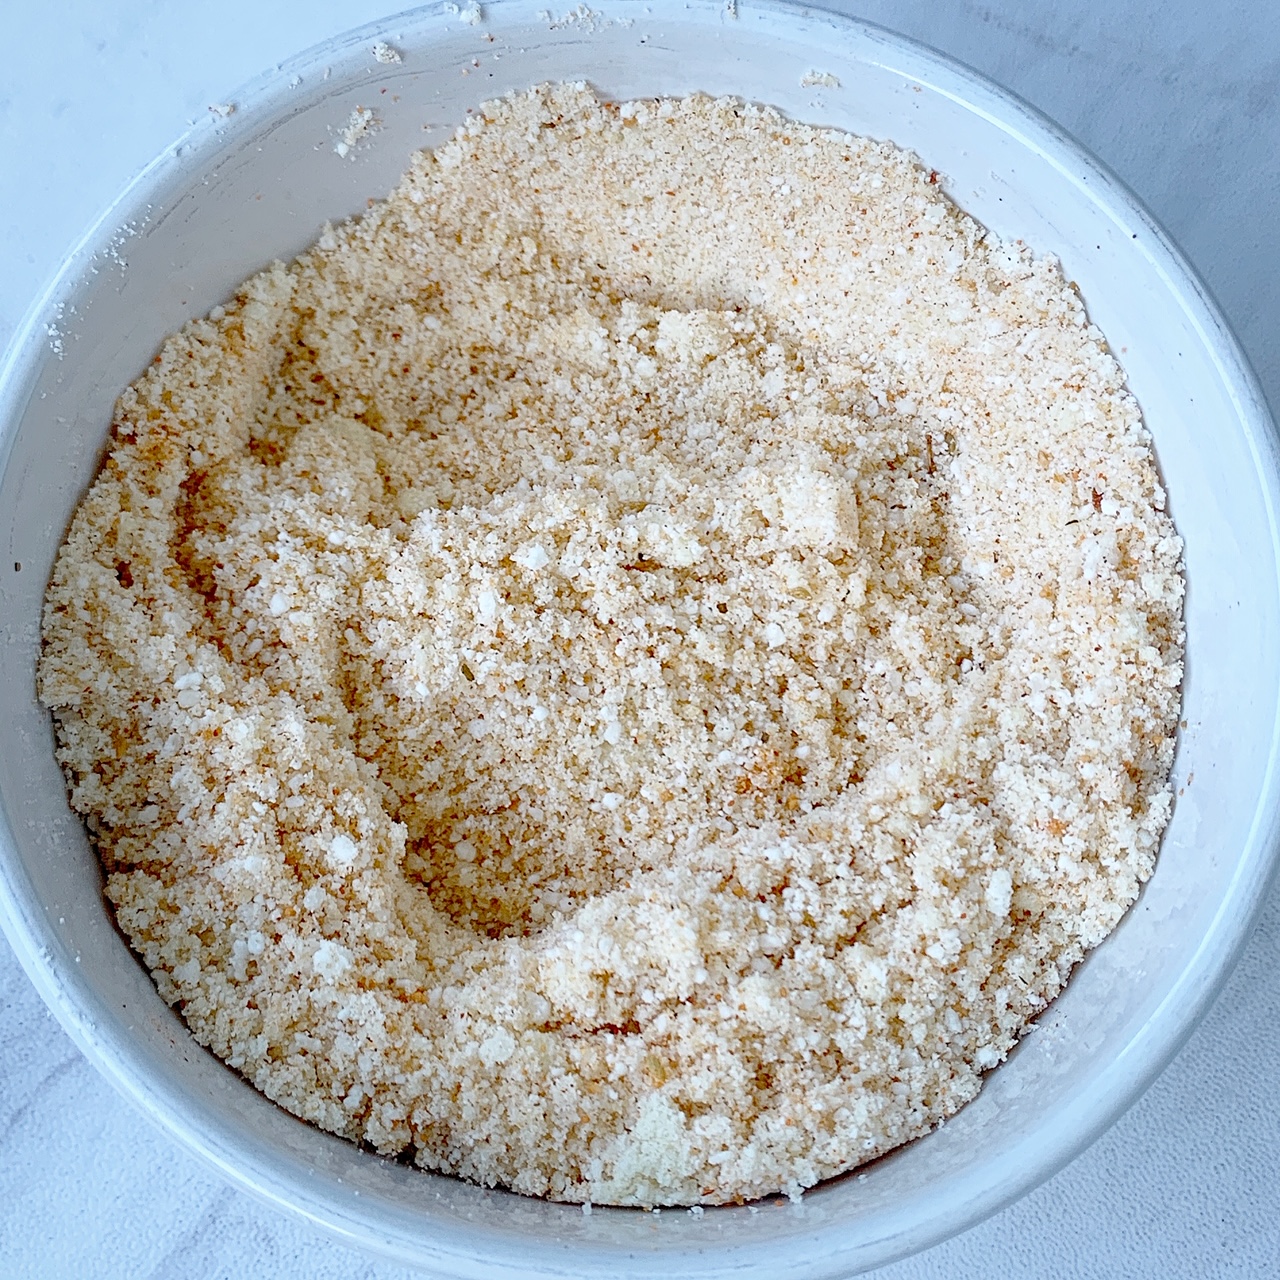 almond flour & Parmesan cheese with Tony Chachere's no salt seasoning in a bowl